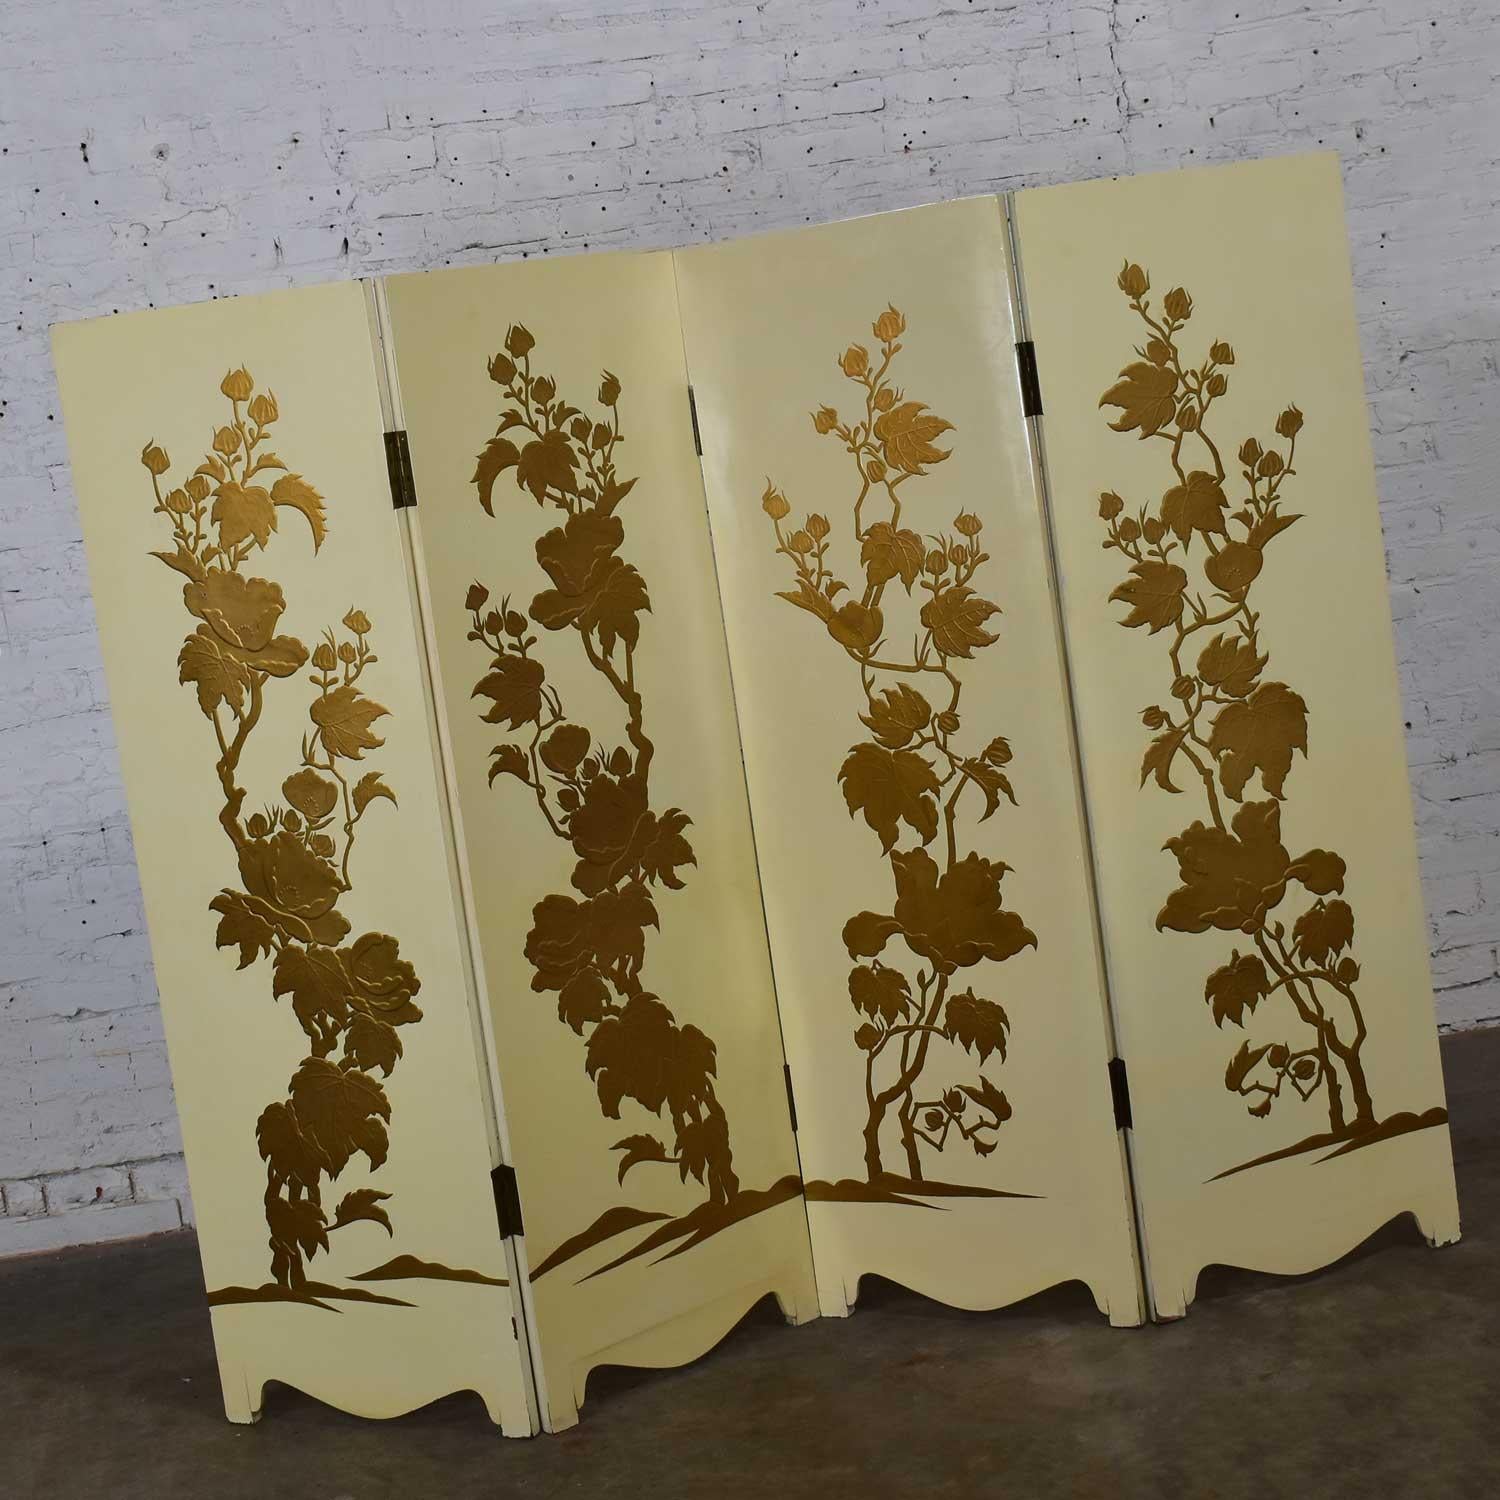 Stunning Hollywood Regency or boho chic four panel folding screen comprised of off-white painted finished wood, embossed textured floral print design on front panels in gold, and brass hinges. Beautiful vintage condition with just some minor touch